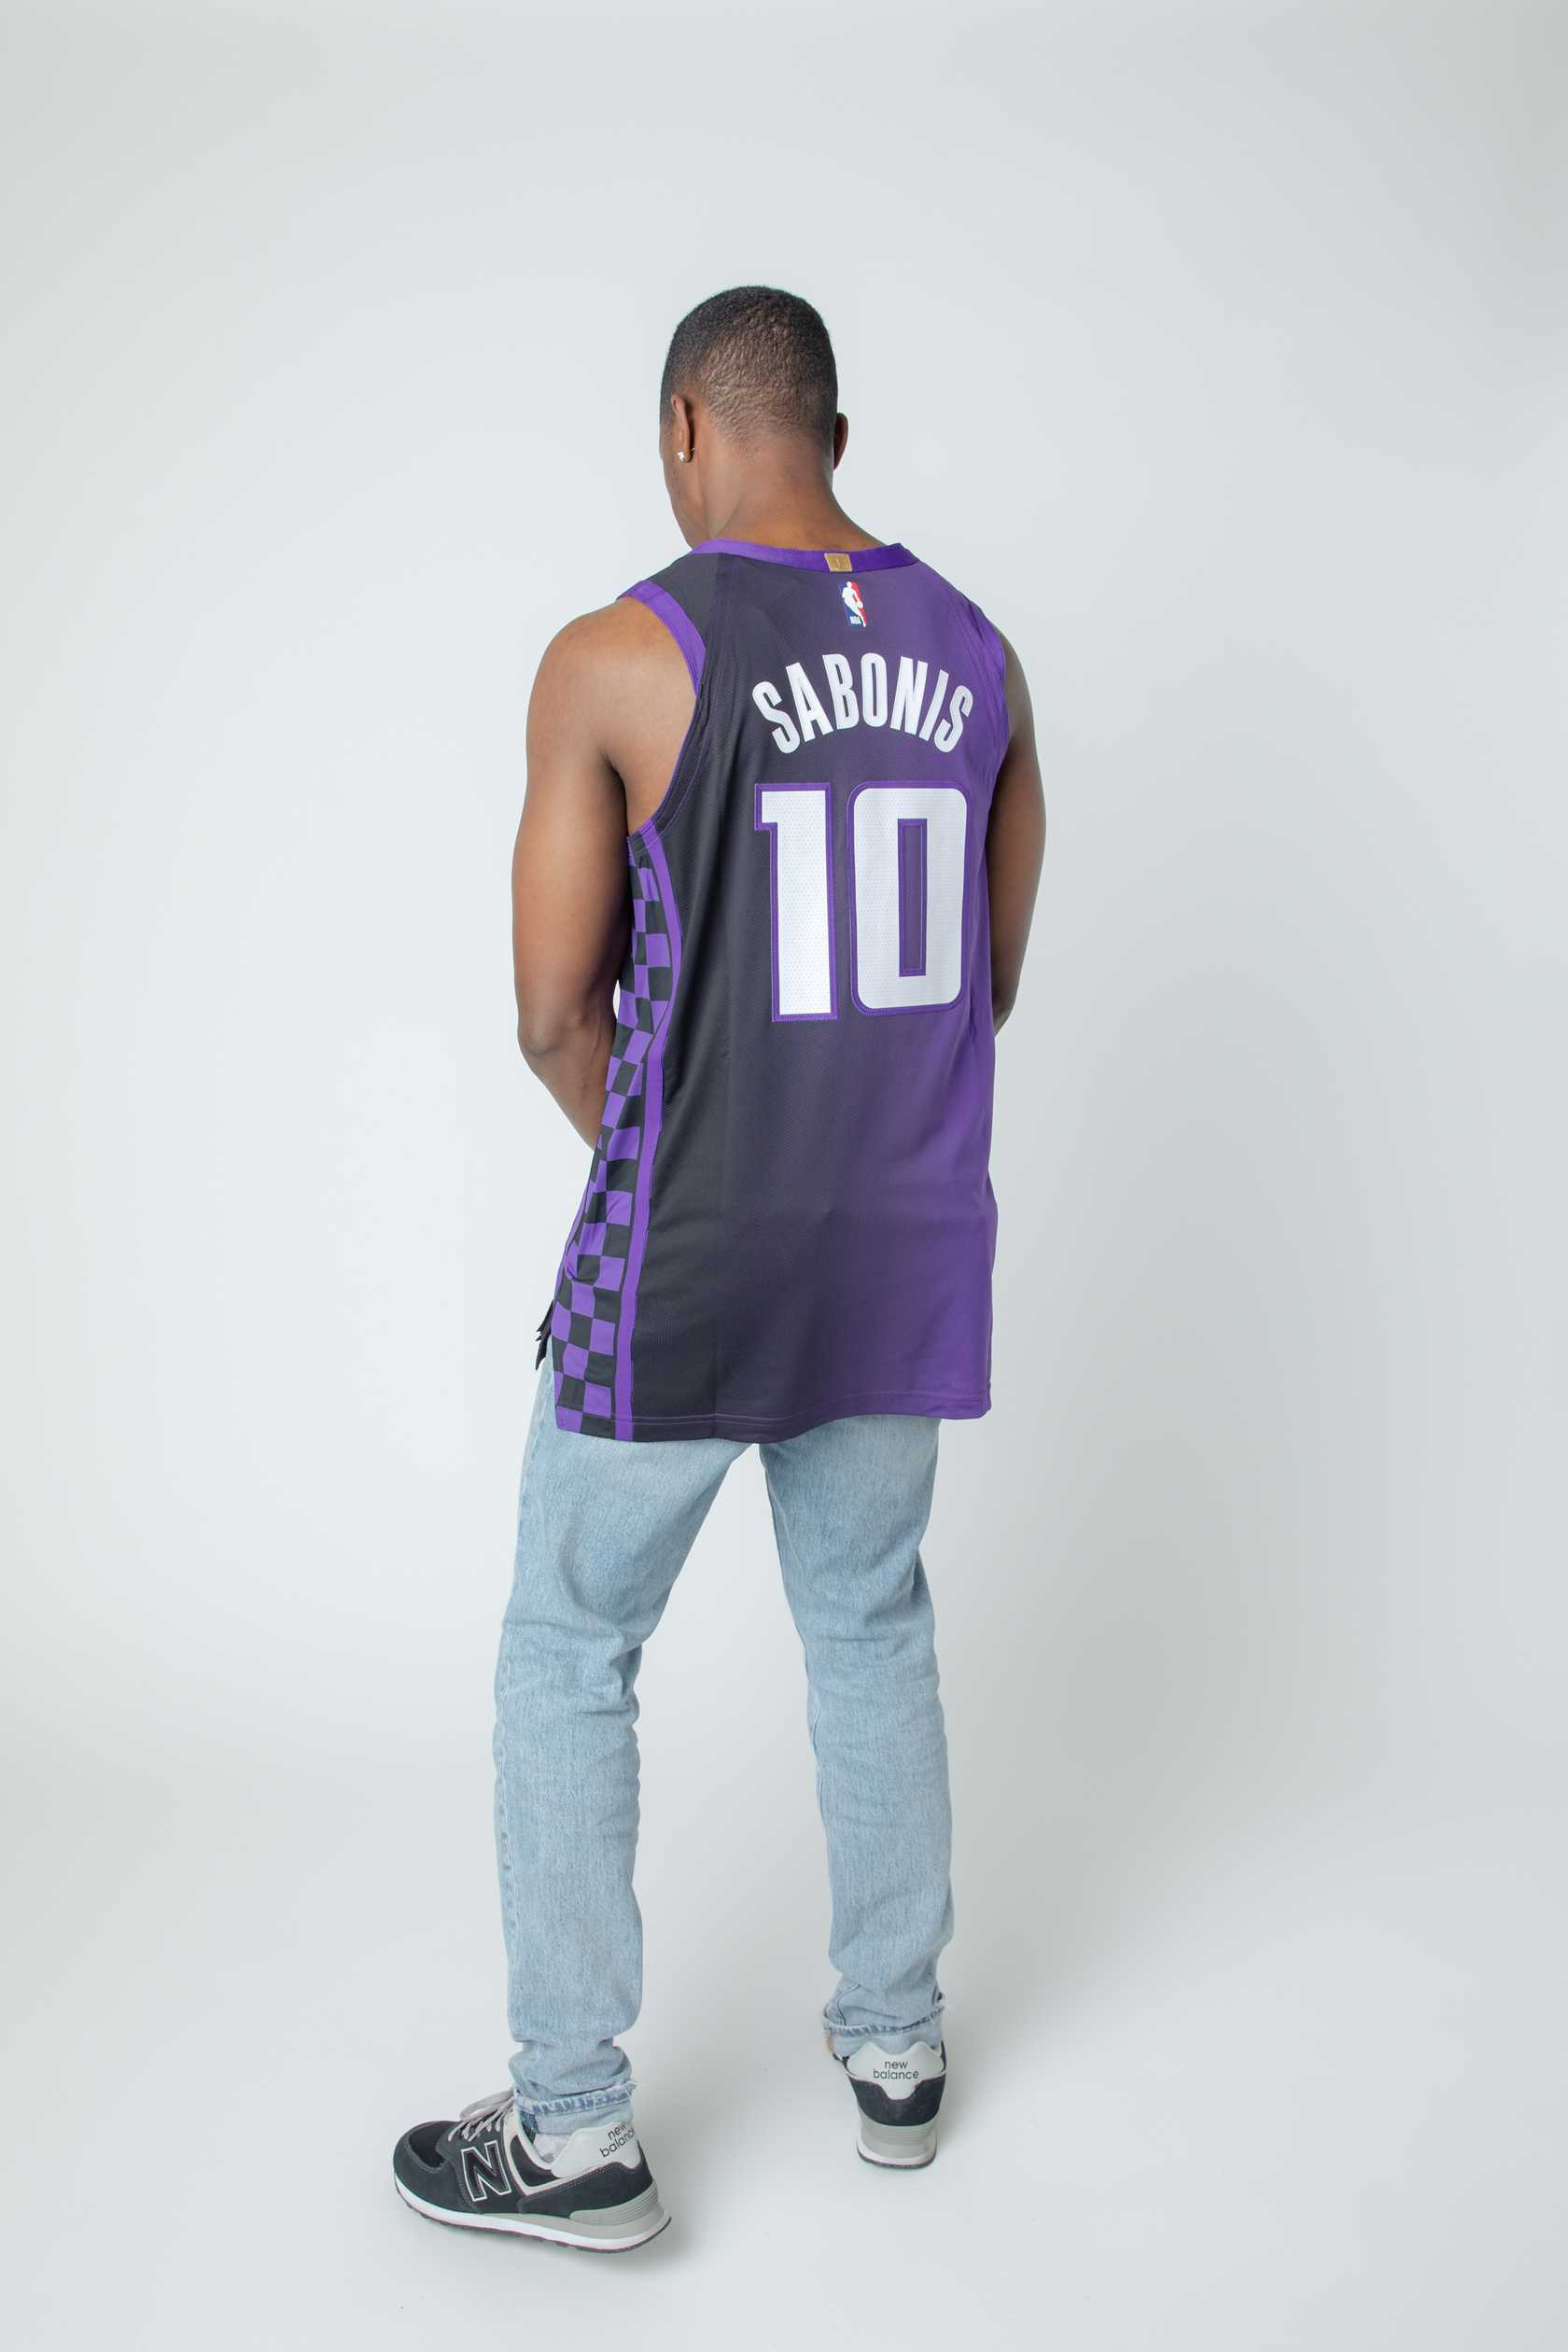 Men's Lakers 2023 Jersey Collection - All Stitched